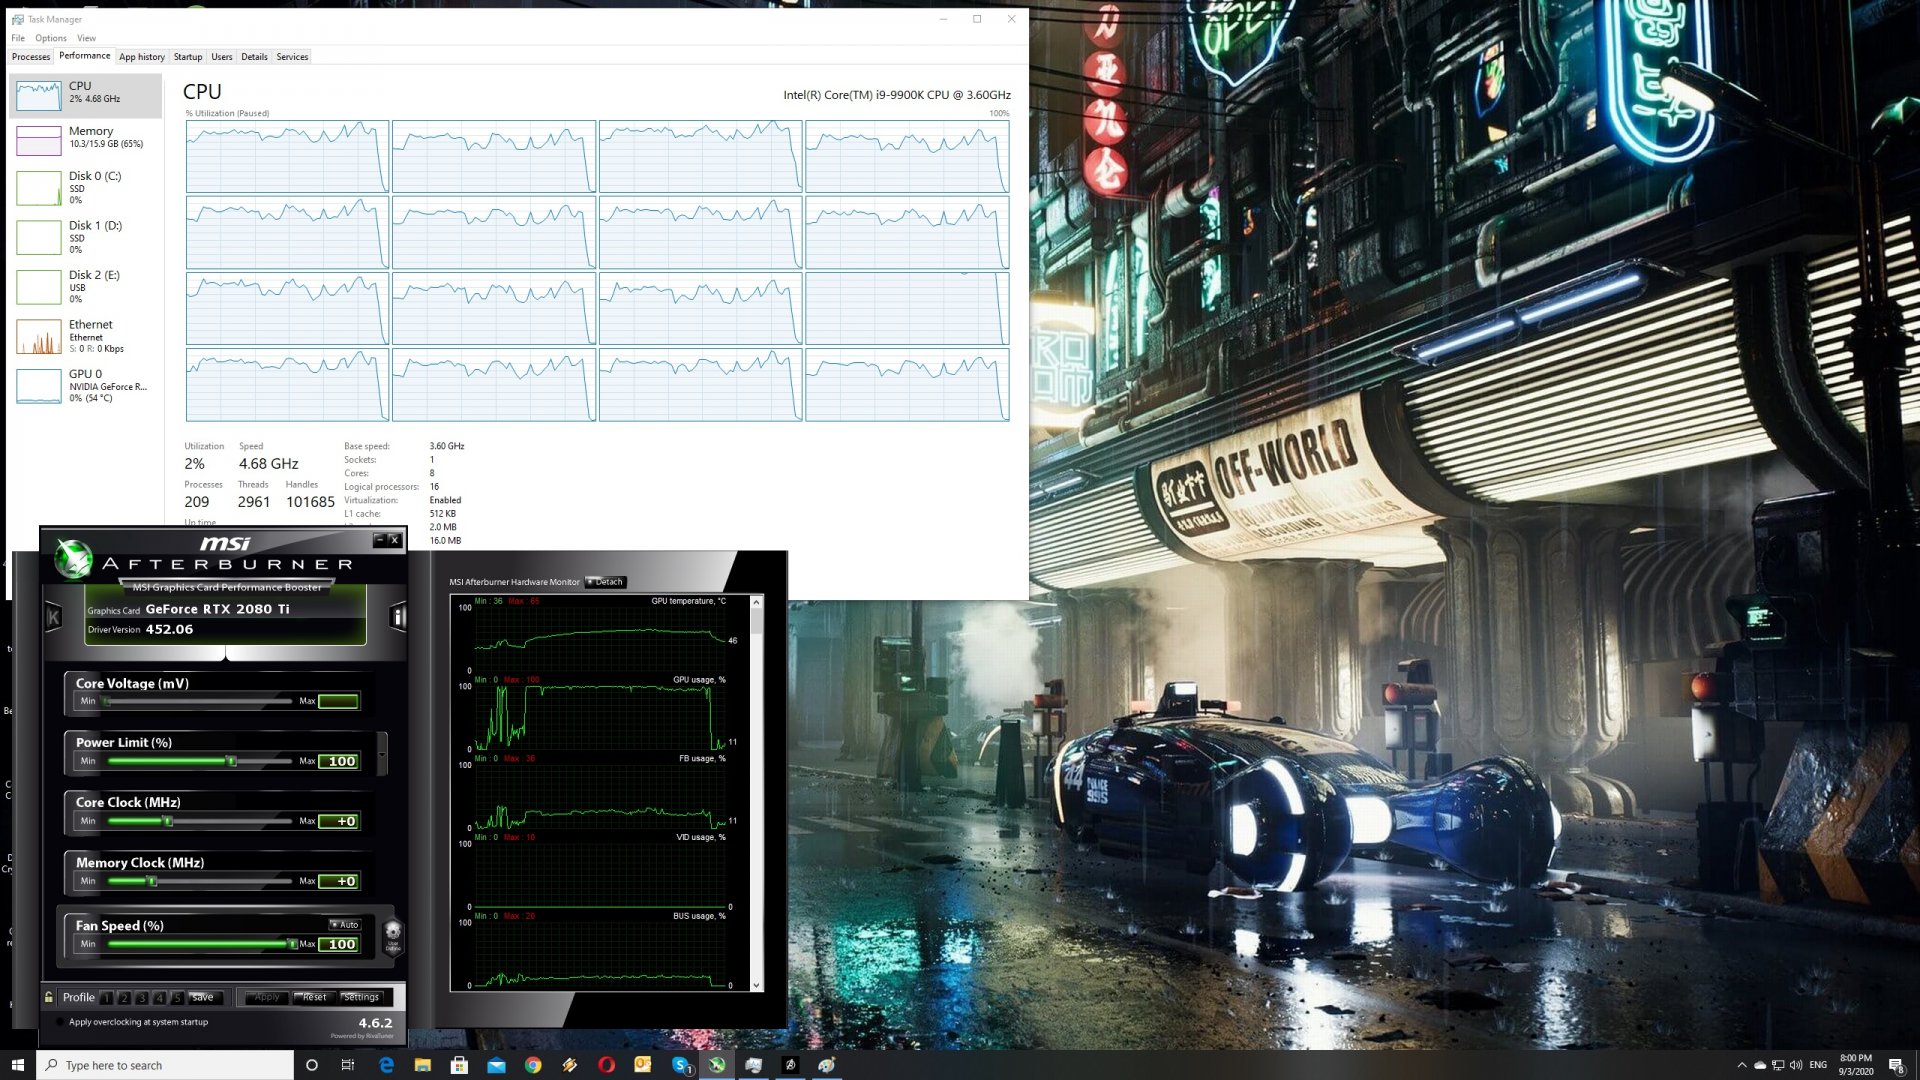 Marvels Avengers CPU scaling